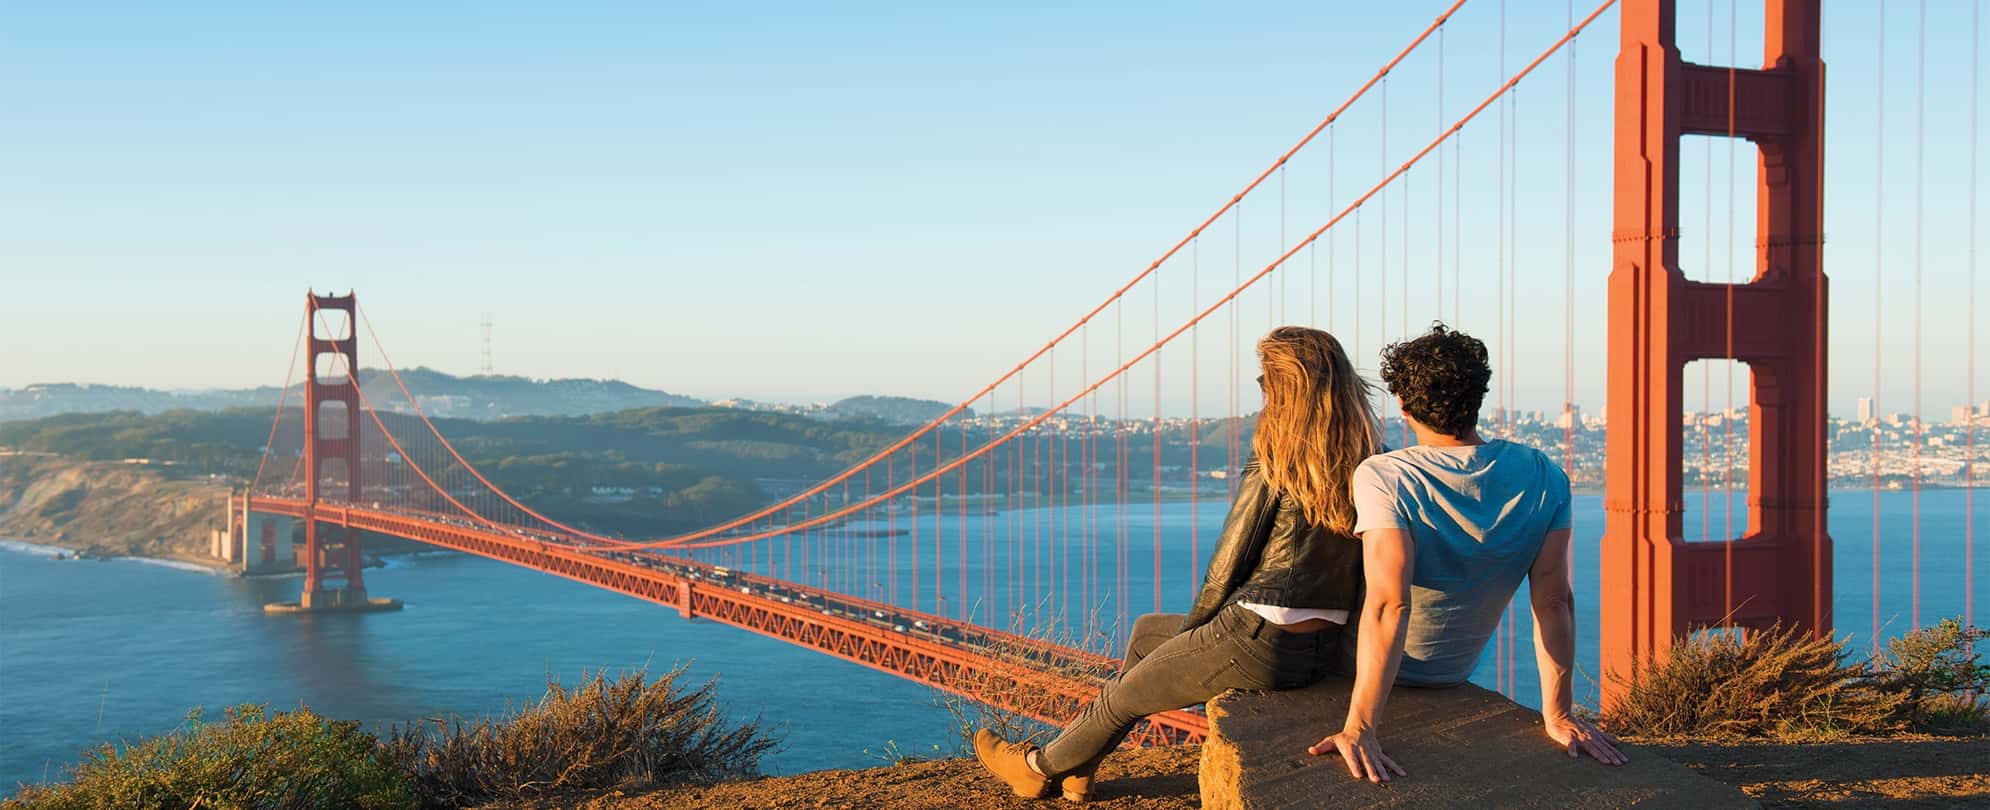 A man and woman sit on a rock up on a hill, staring out over the Golden Gate Bridge in San Francisco, California.